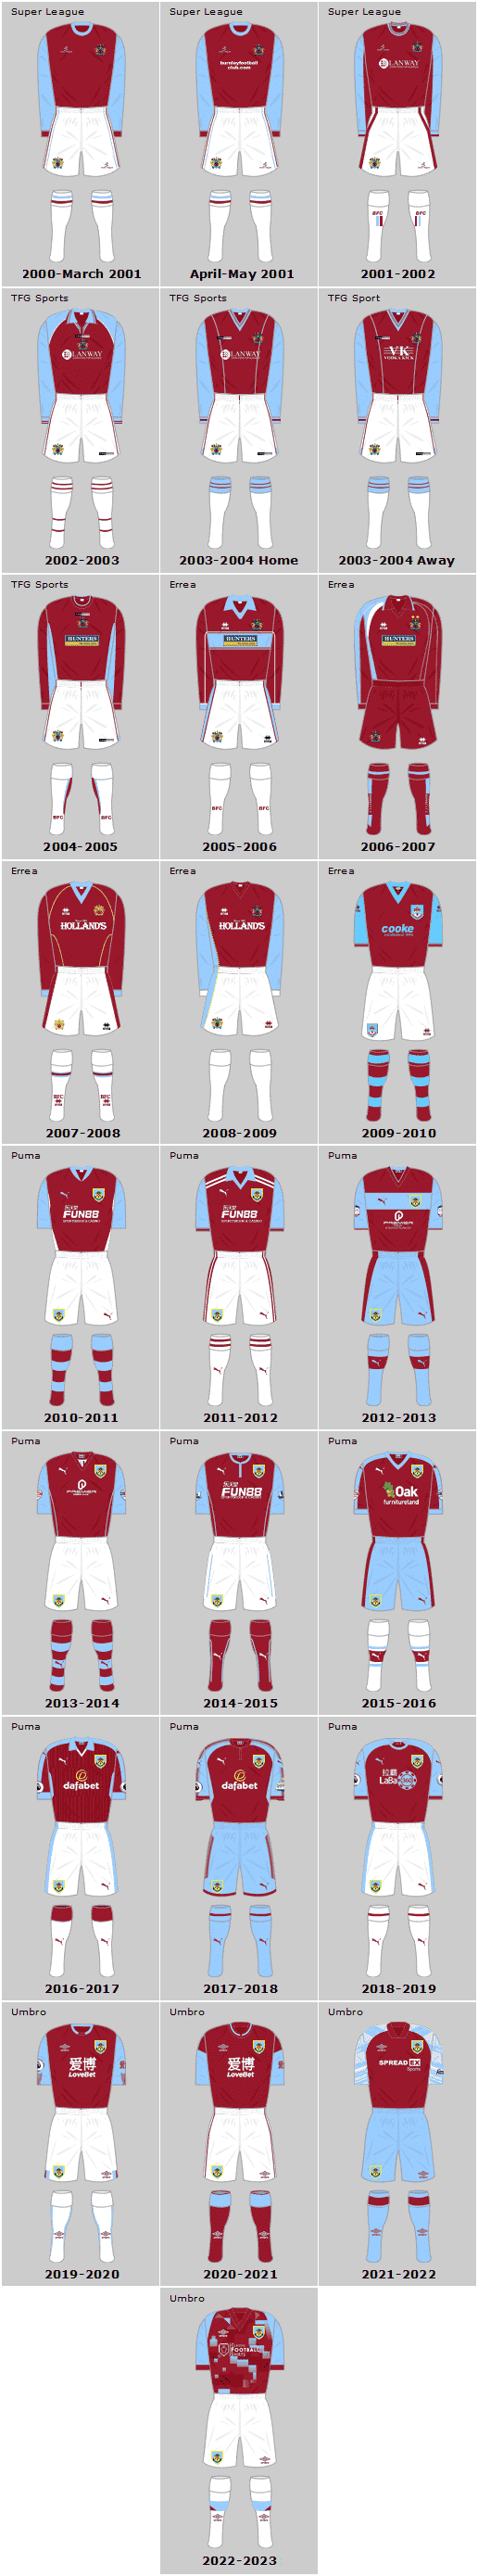 Burnley FC 21st Century Home Playing Kits